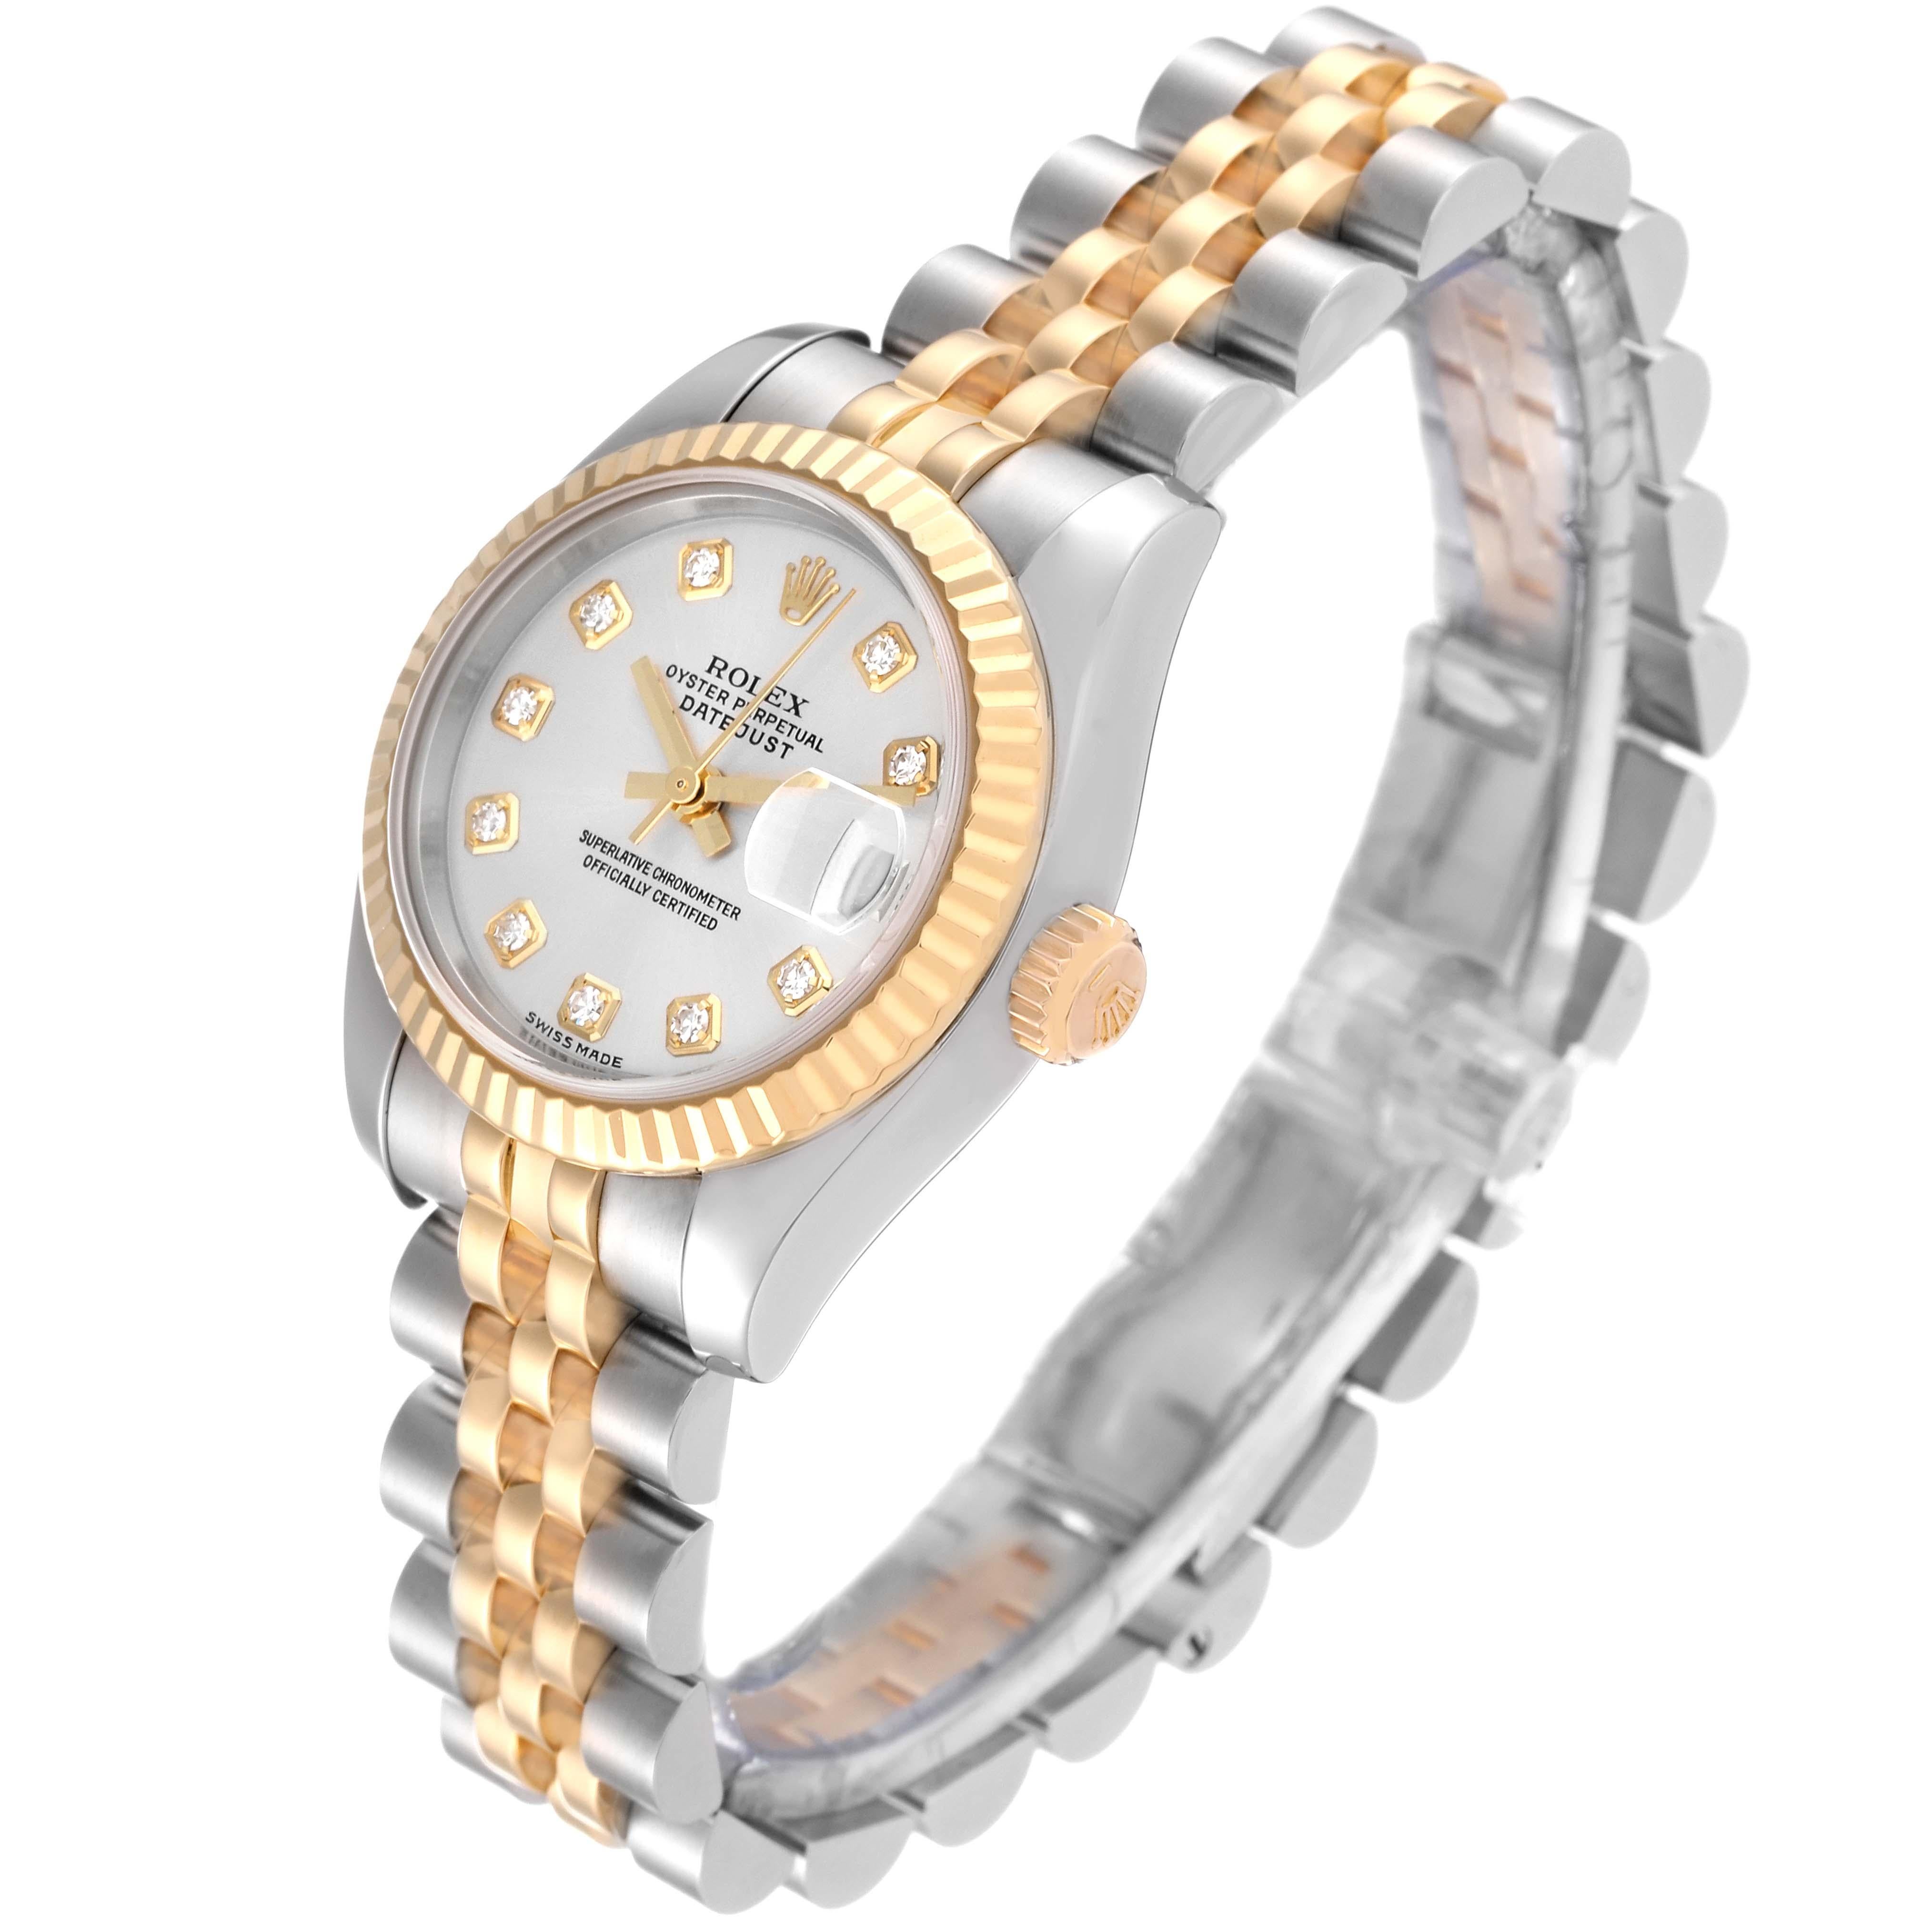 Rolex Datejust 26 Steel Yellow Gold Diamond Dial Ladies Watch 179173 For Sale 3